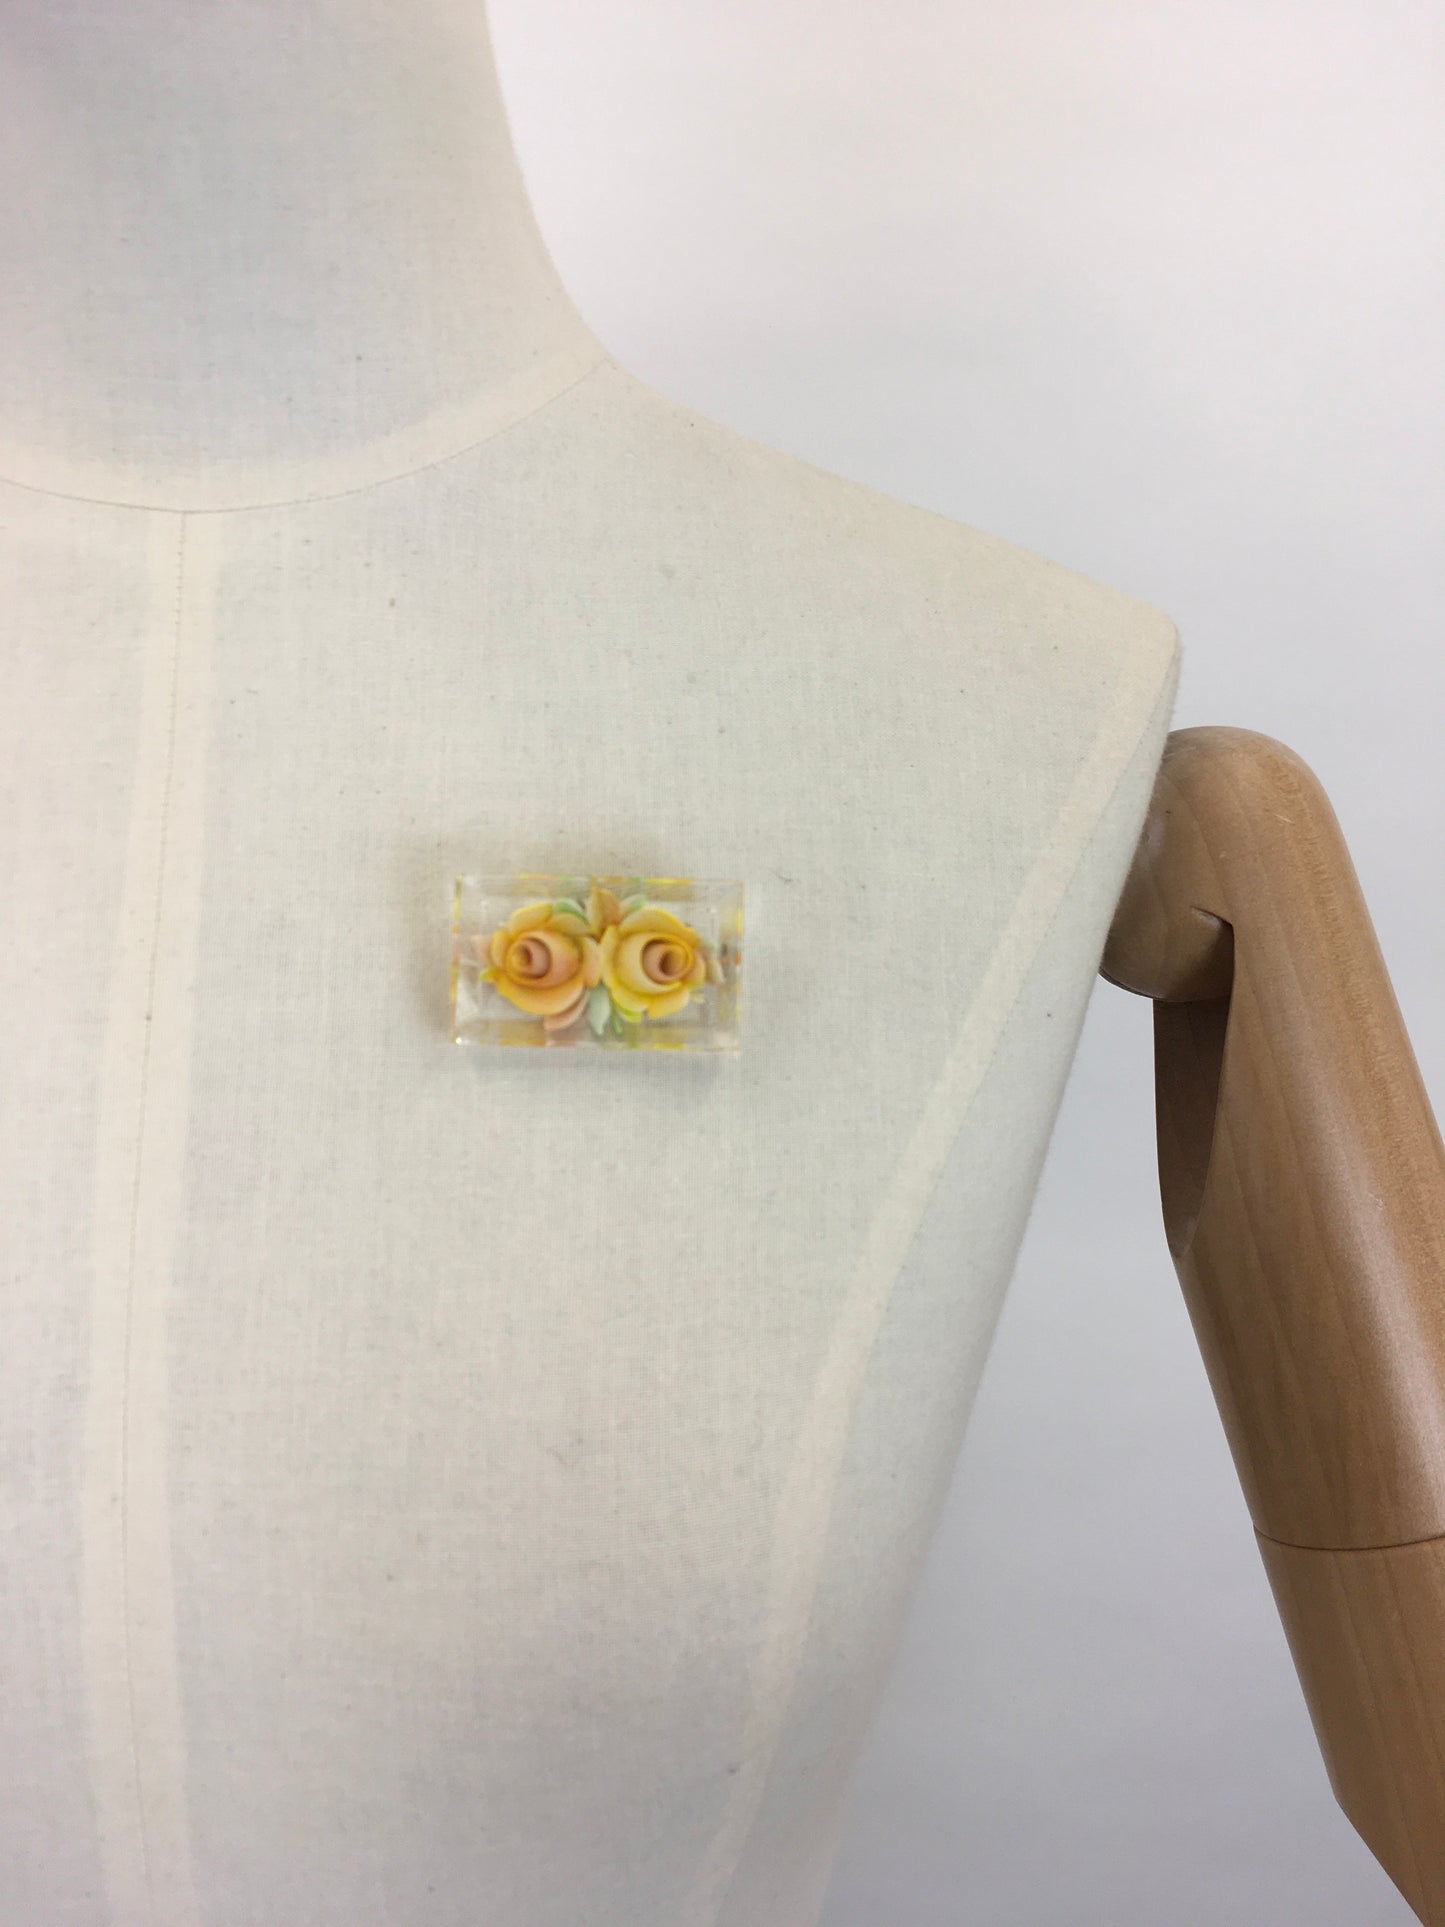 Original 1950’s Reverse Carved Lucite Brooch - In Soft Buttery and Bright Yellows